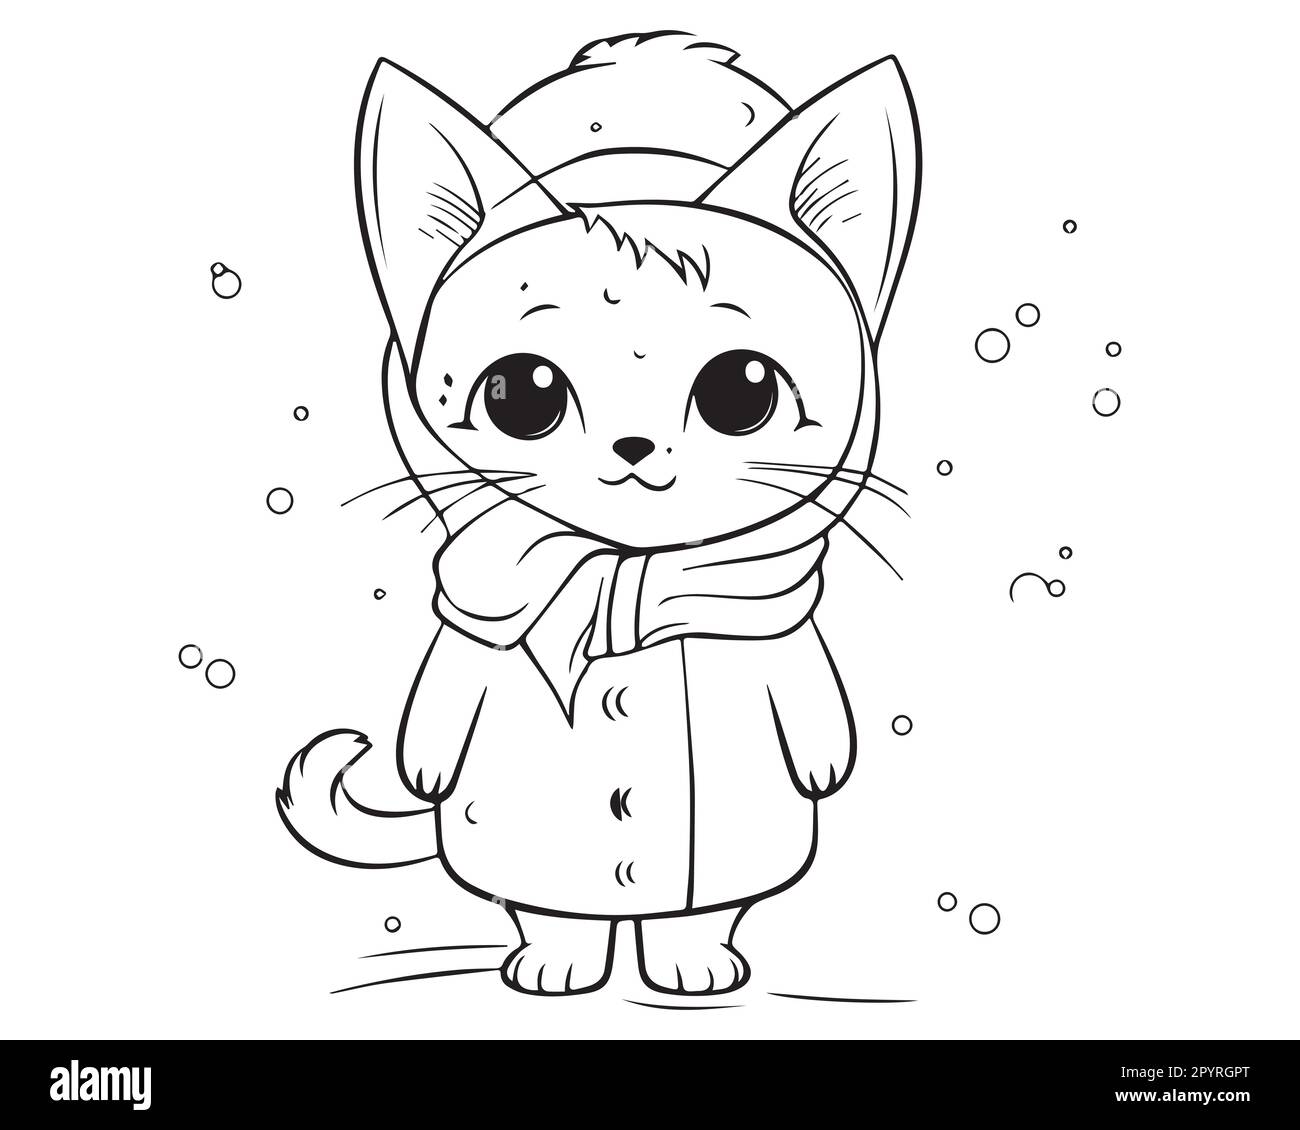 A cat in a coat and a scarf coloring pages. Cute cat coloring pages of cute cat outline art vector. Stock Vector